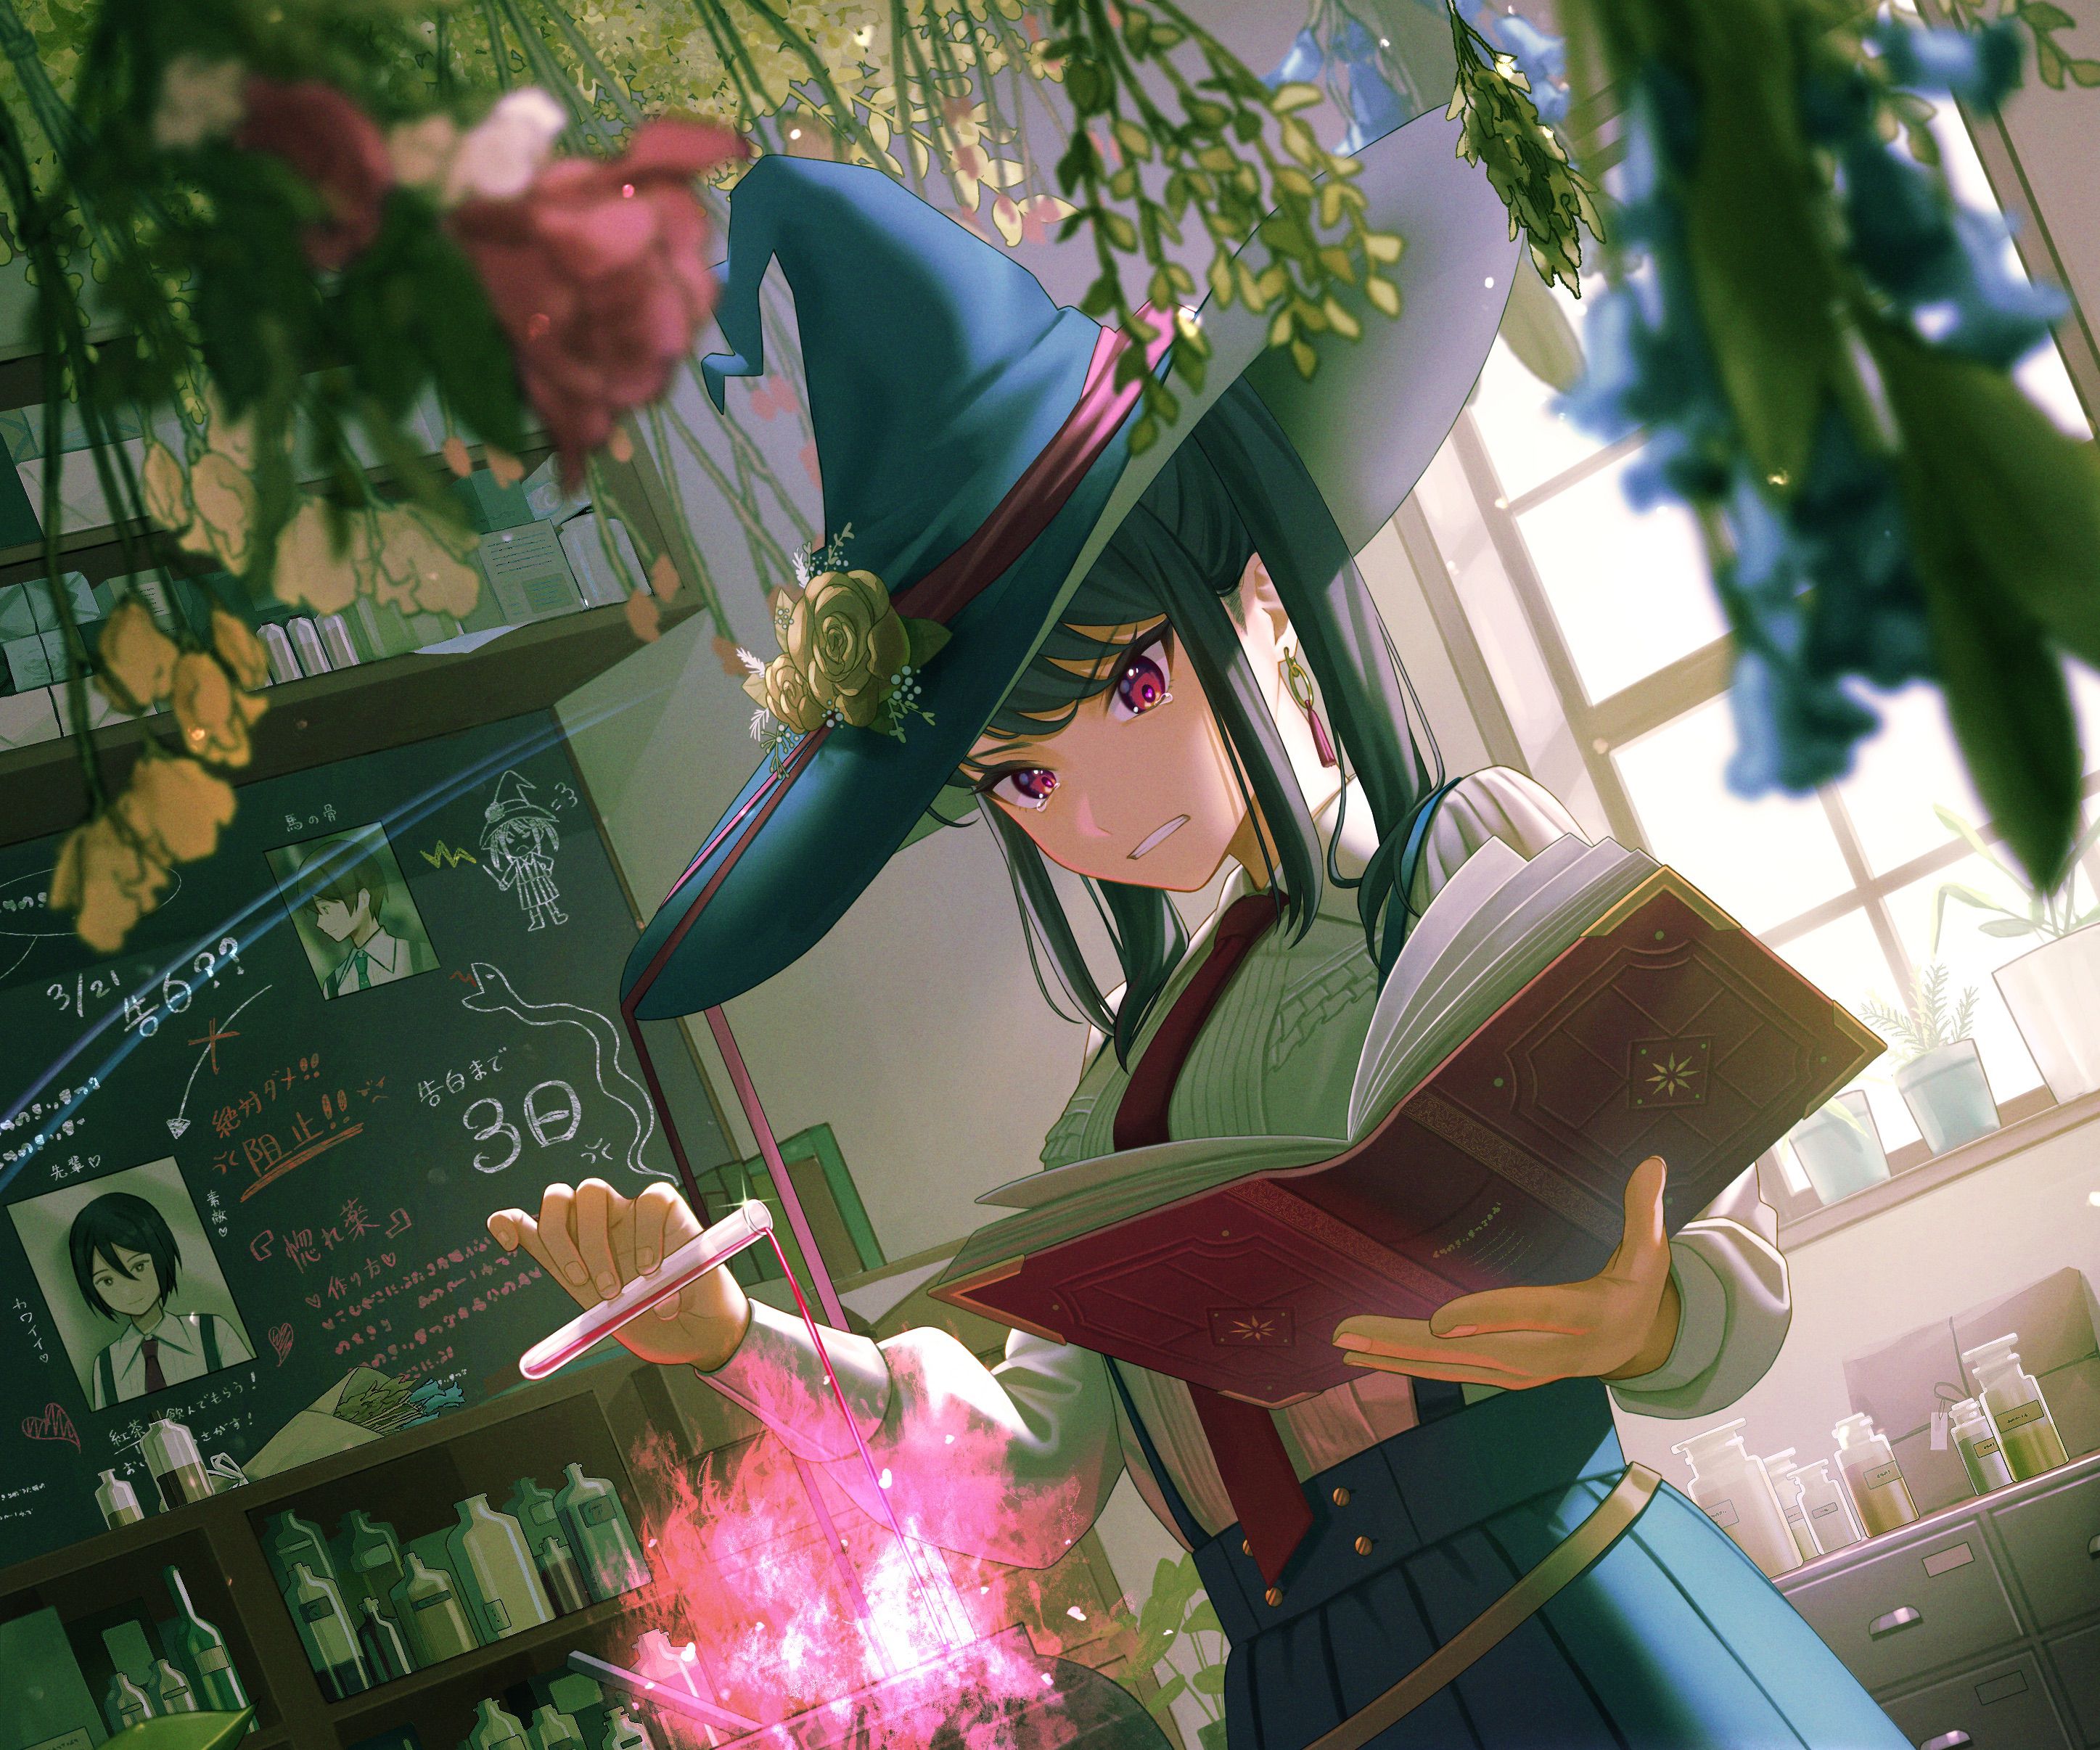 A young girl in a witch's hat is casting a spell with a wand and a book. - Witch